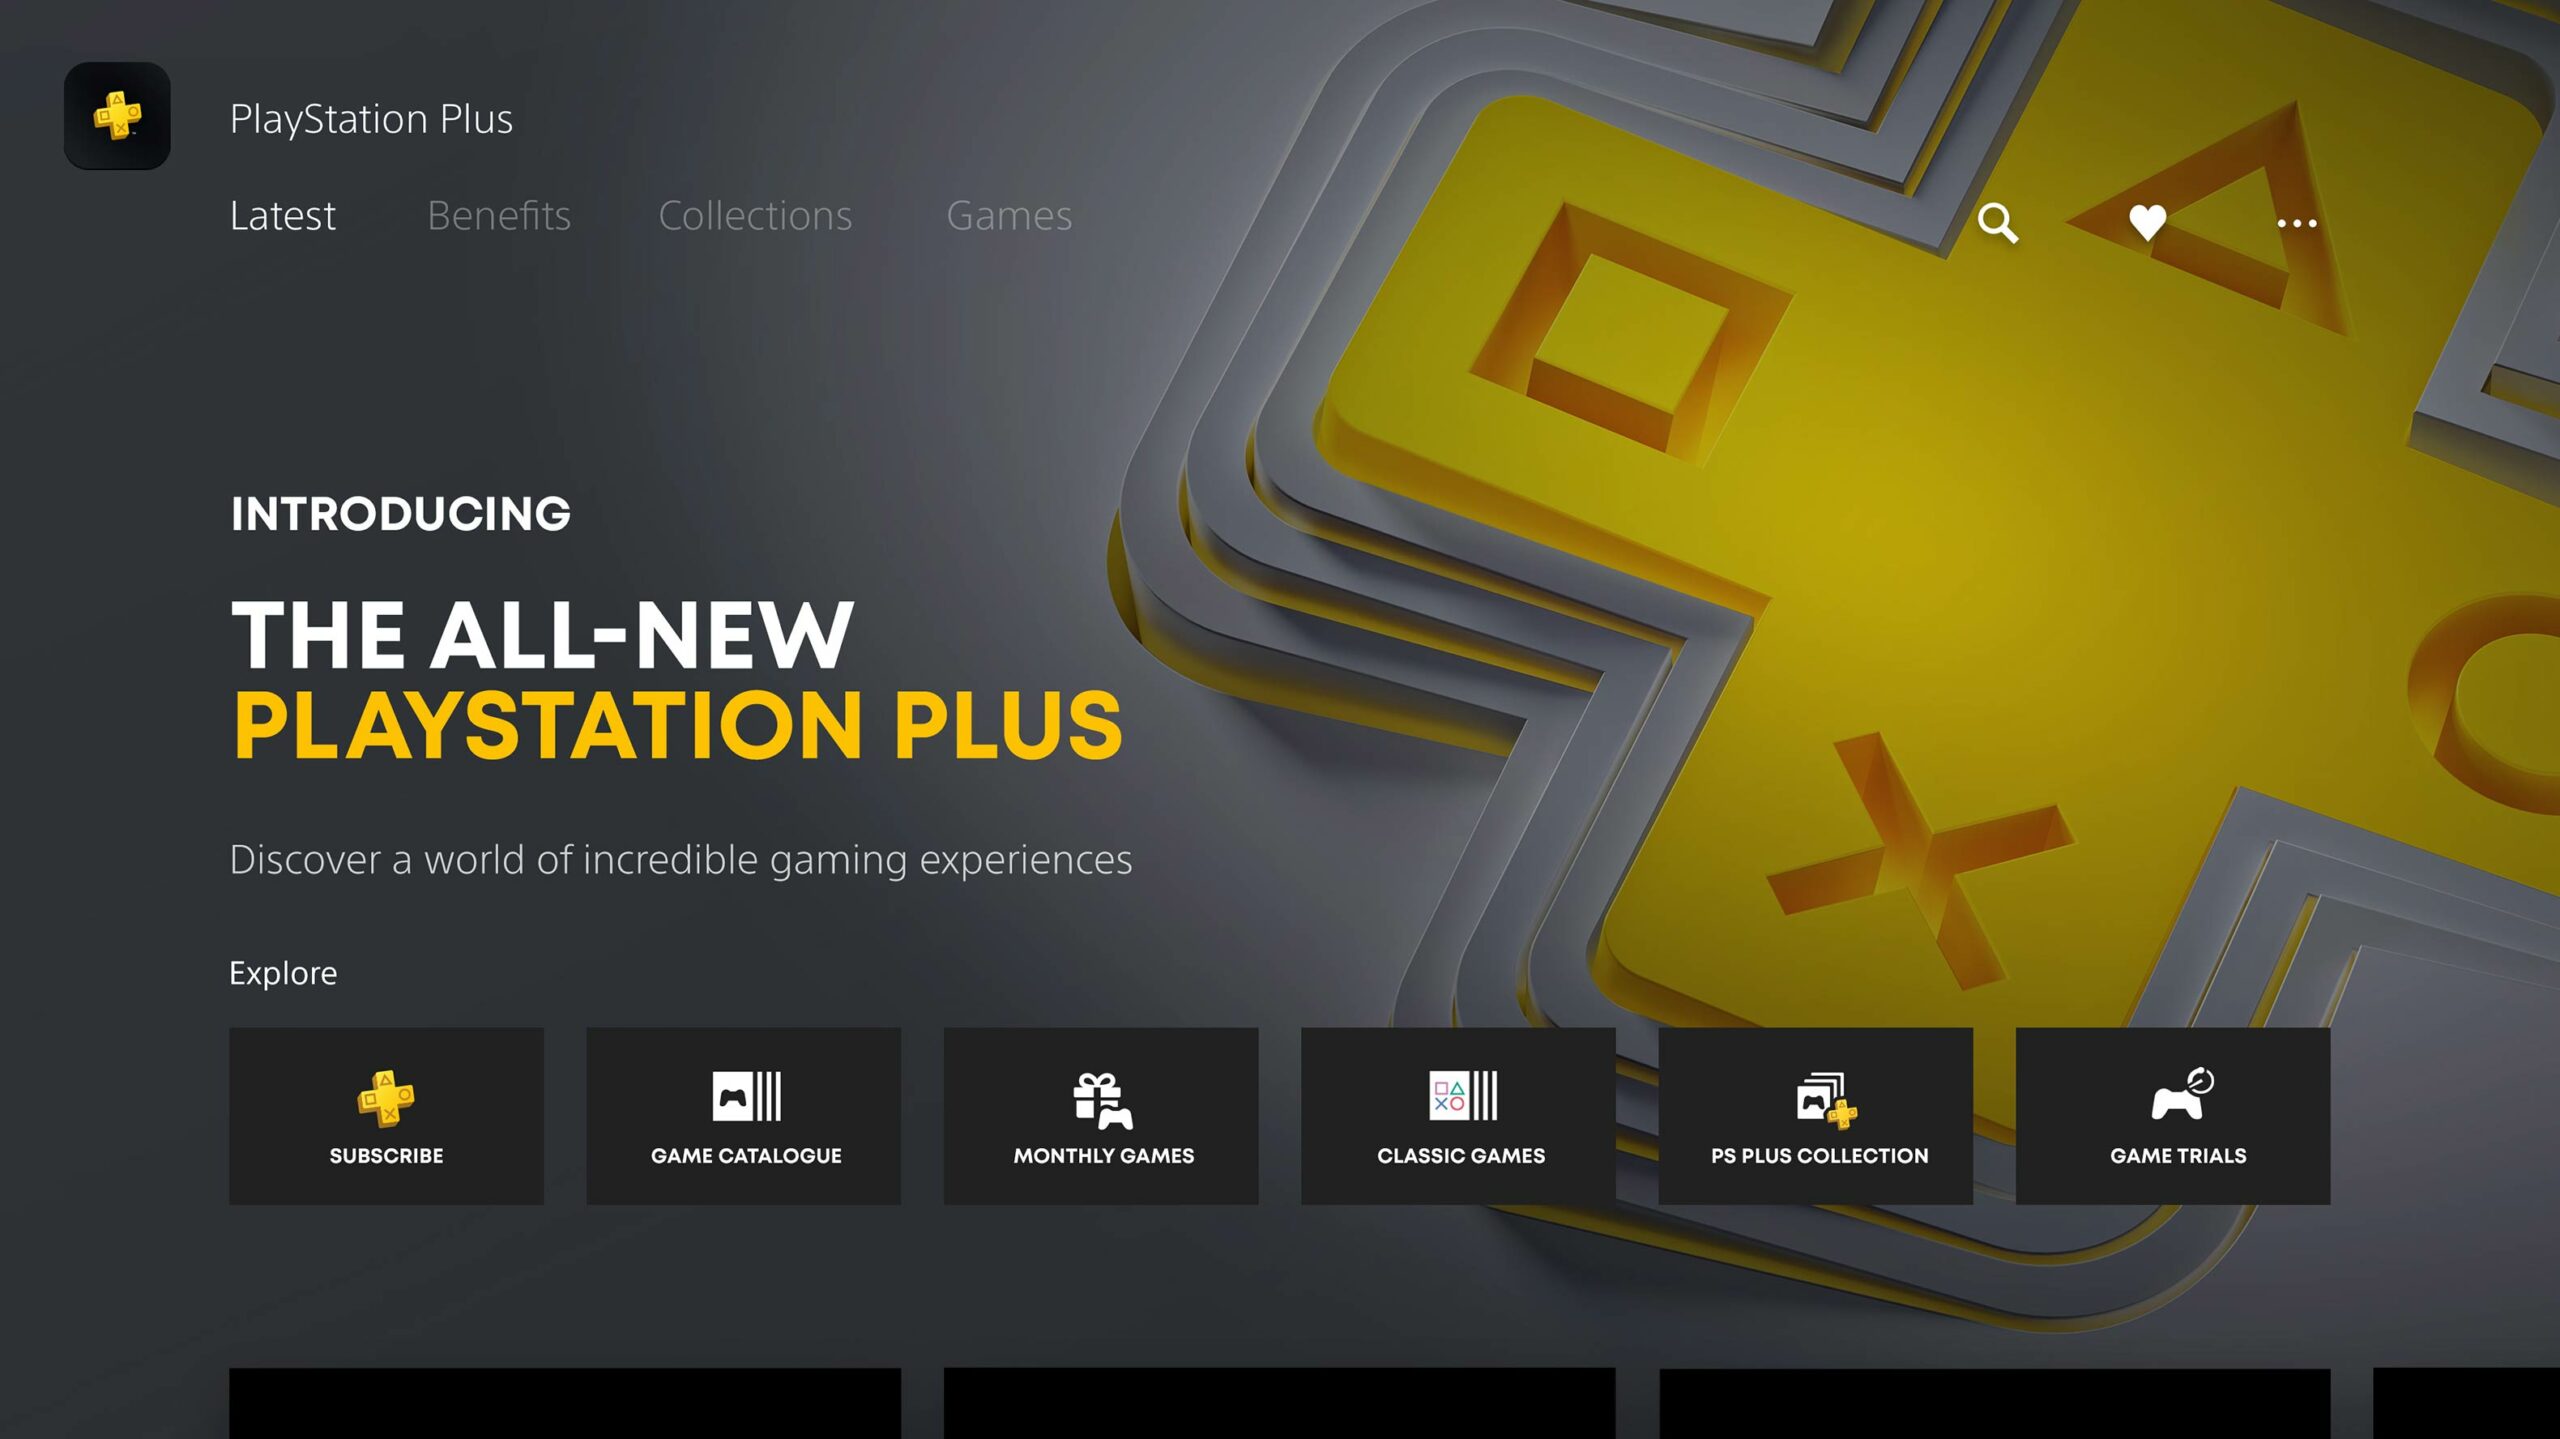 The home page for the new PlayStation Plus. Tabs for Subscribe, Game Catalogue, Monthly Games, Classic Games, PS Plus Collection, and Game Trials are featured.